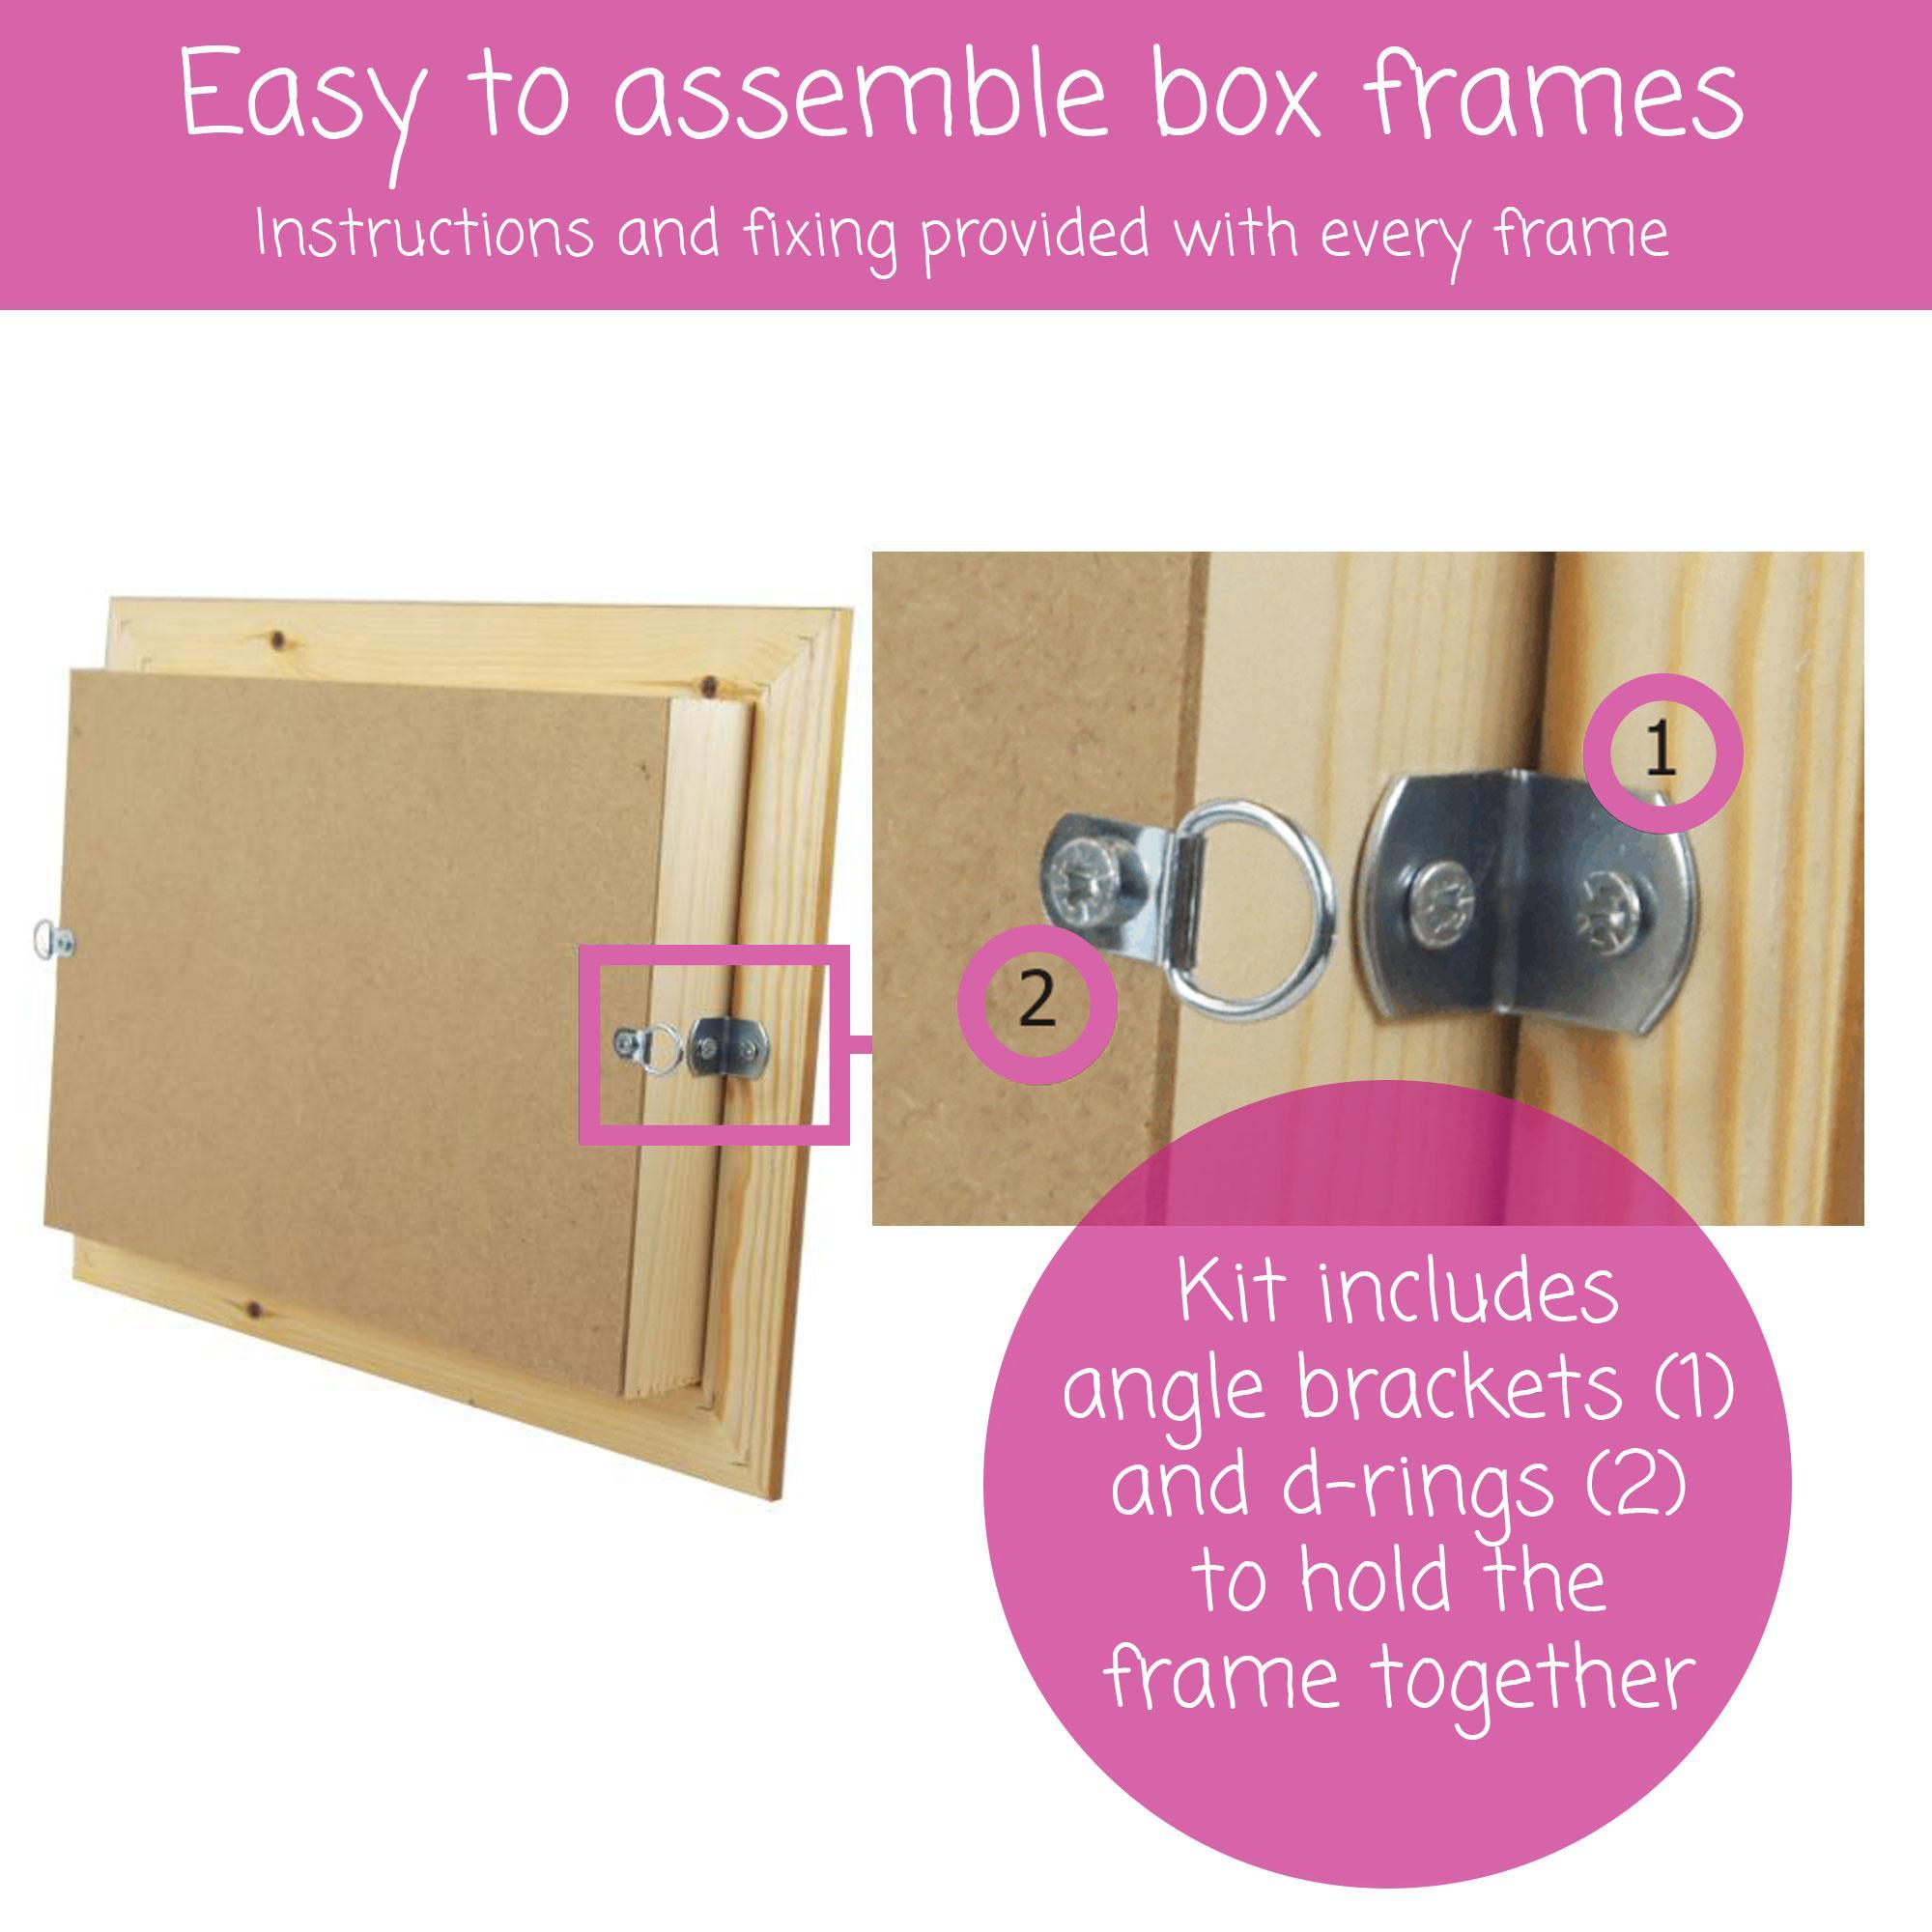 Example of the rear of the box frame